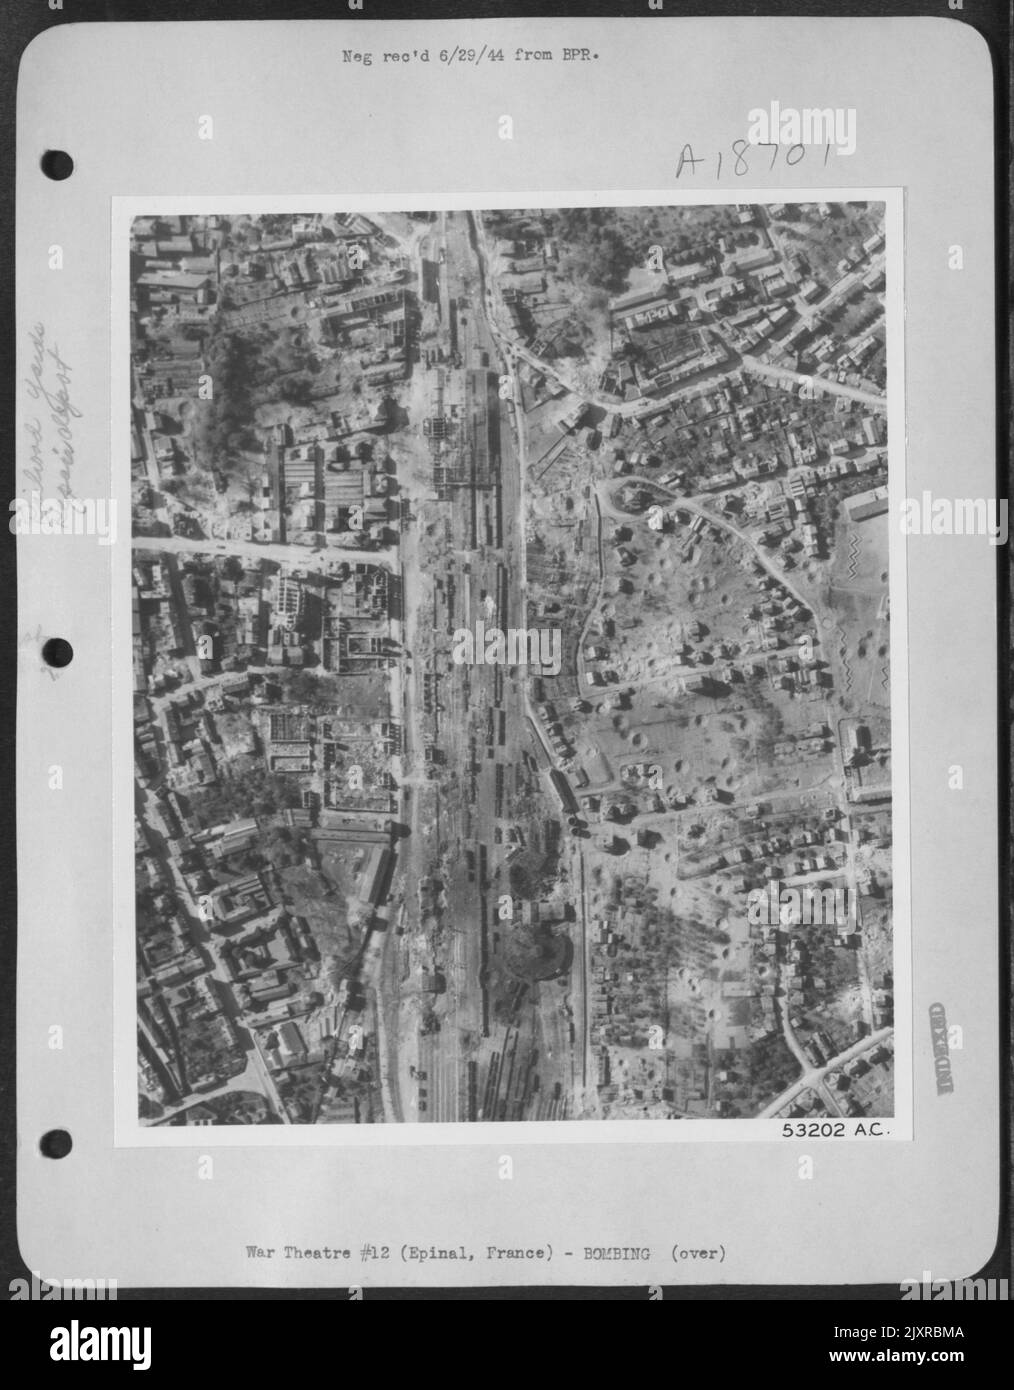 Severe damage to roundhouses, repair shops and adjacent buildings is most evident in this reconnaissance photo of the rail marshalling yards at Epinal, France, taken after the attack by 8th USAAF heavy bombers on 23 May 44. Direct hits partially Stock Photo